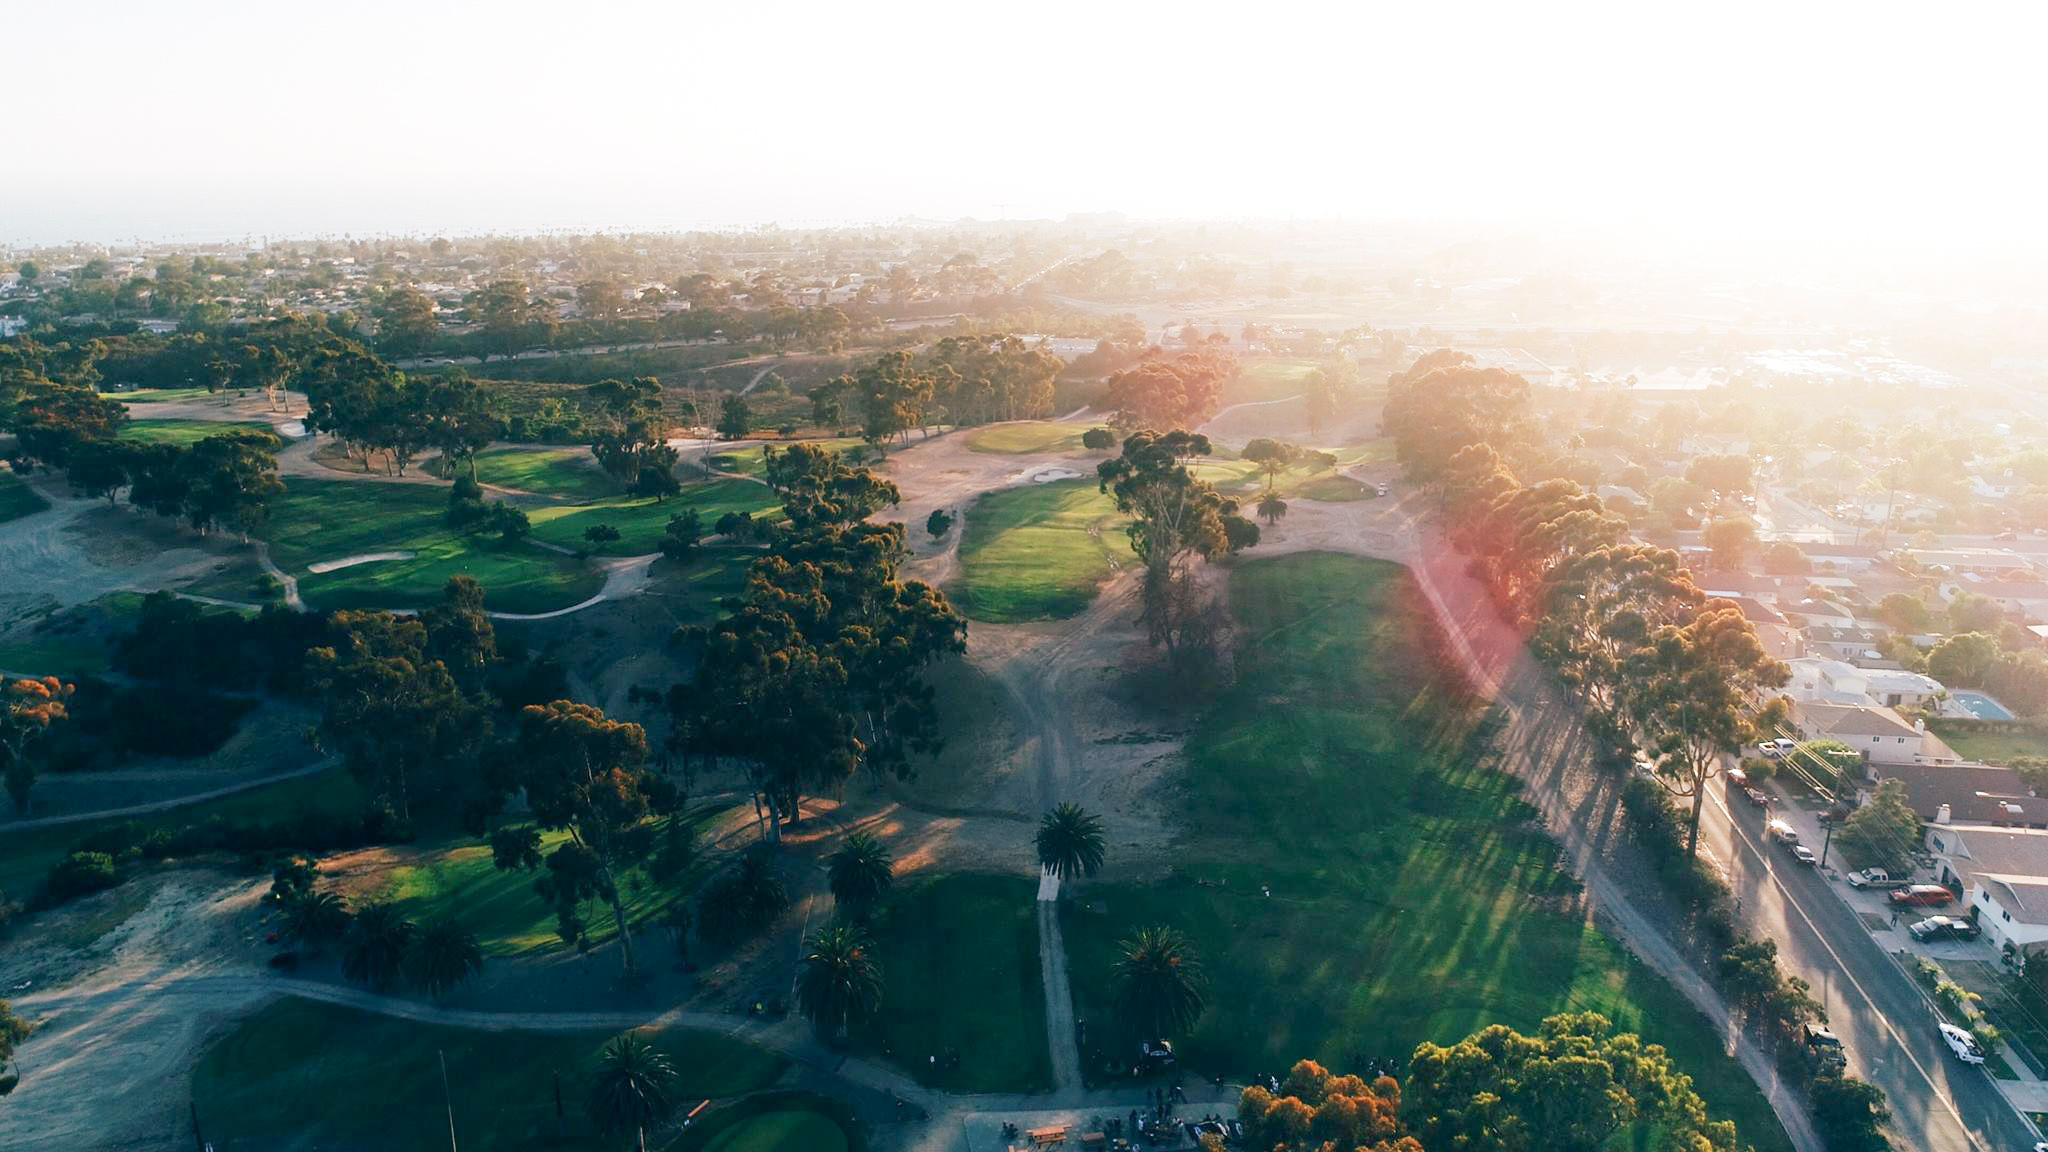 relates to Pursuits Weekly: Revitalizing Municipal Golf Across America